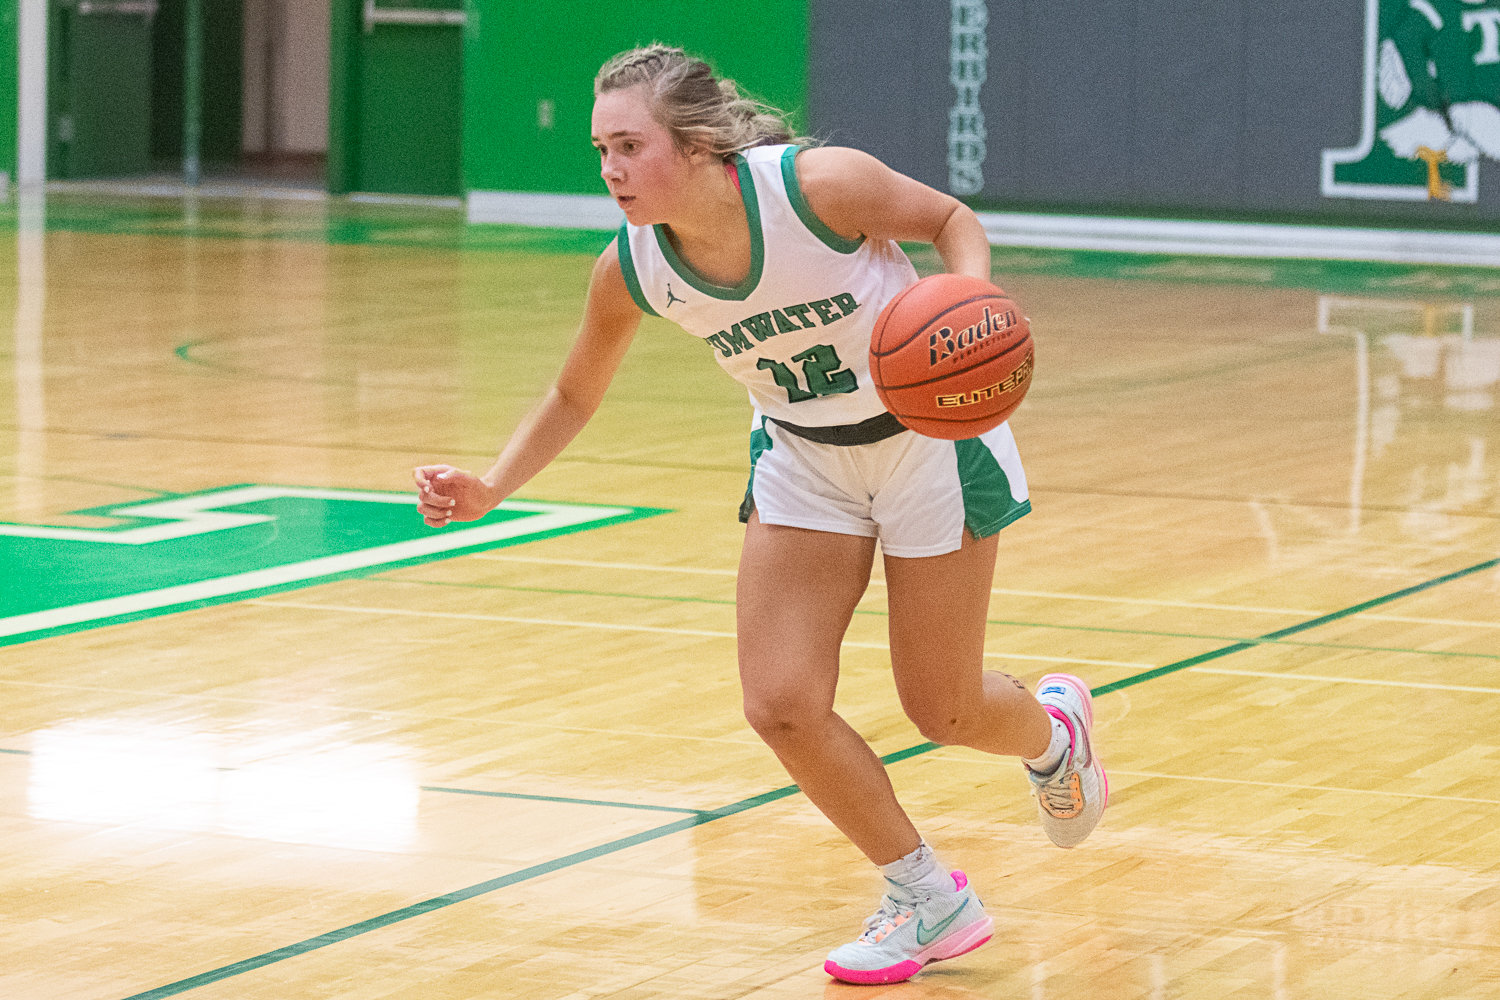 Rhylee Beebe dribbles the ball during the second half of Tumwater's 37-21 loss to Montesano on Dec. 22.